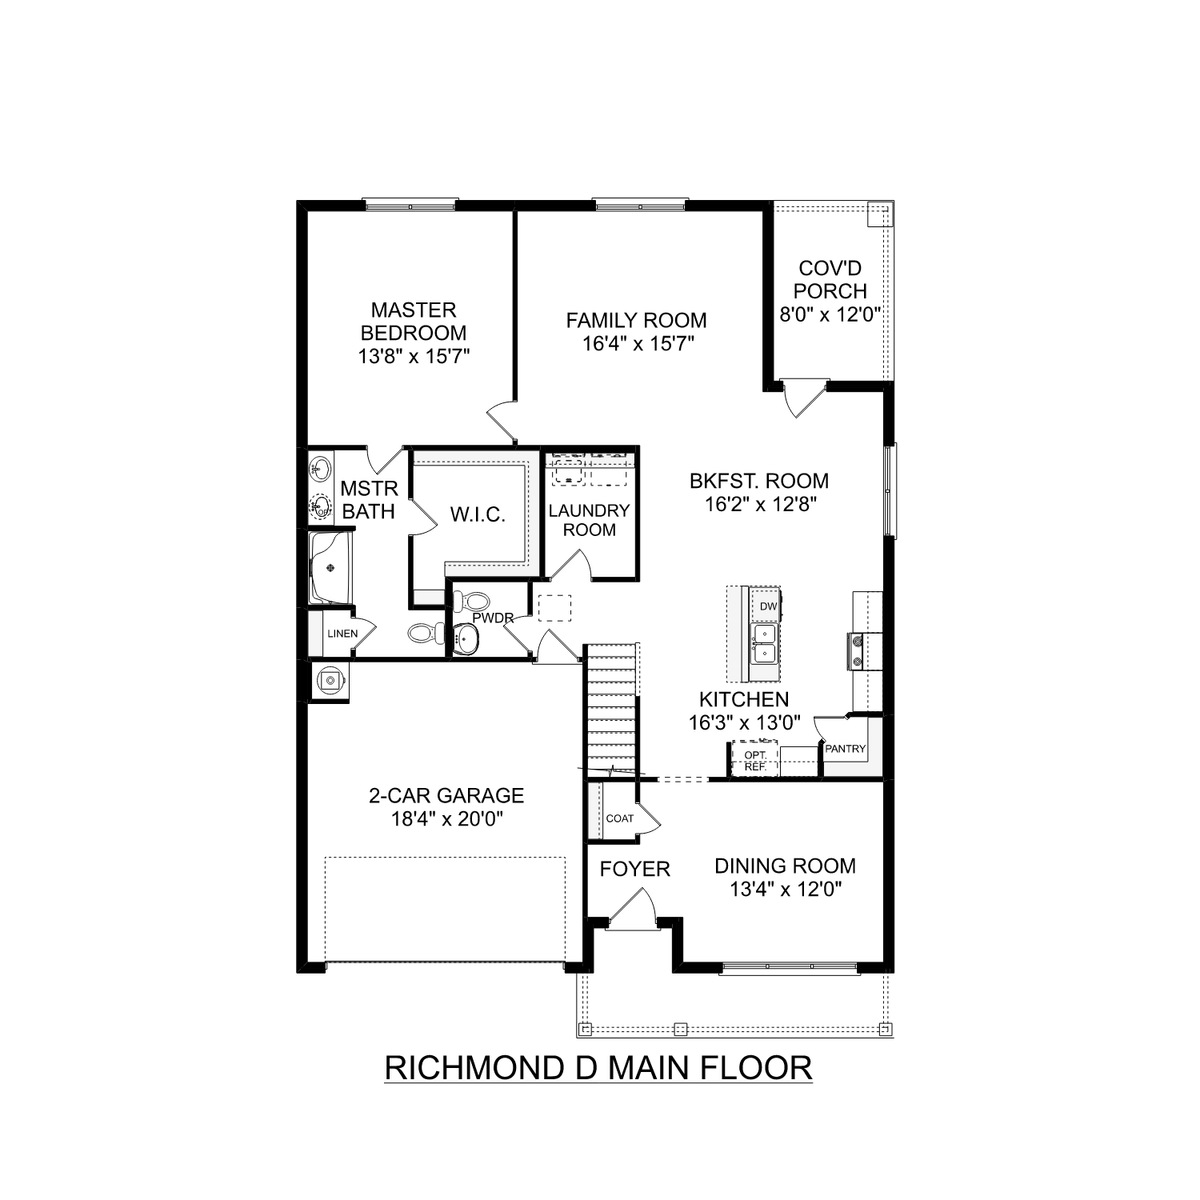 1 - The Richmond D buildable floor plan layout in Davidson Homes' Blue Spring community.